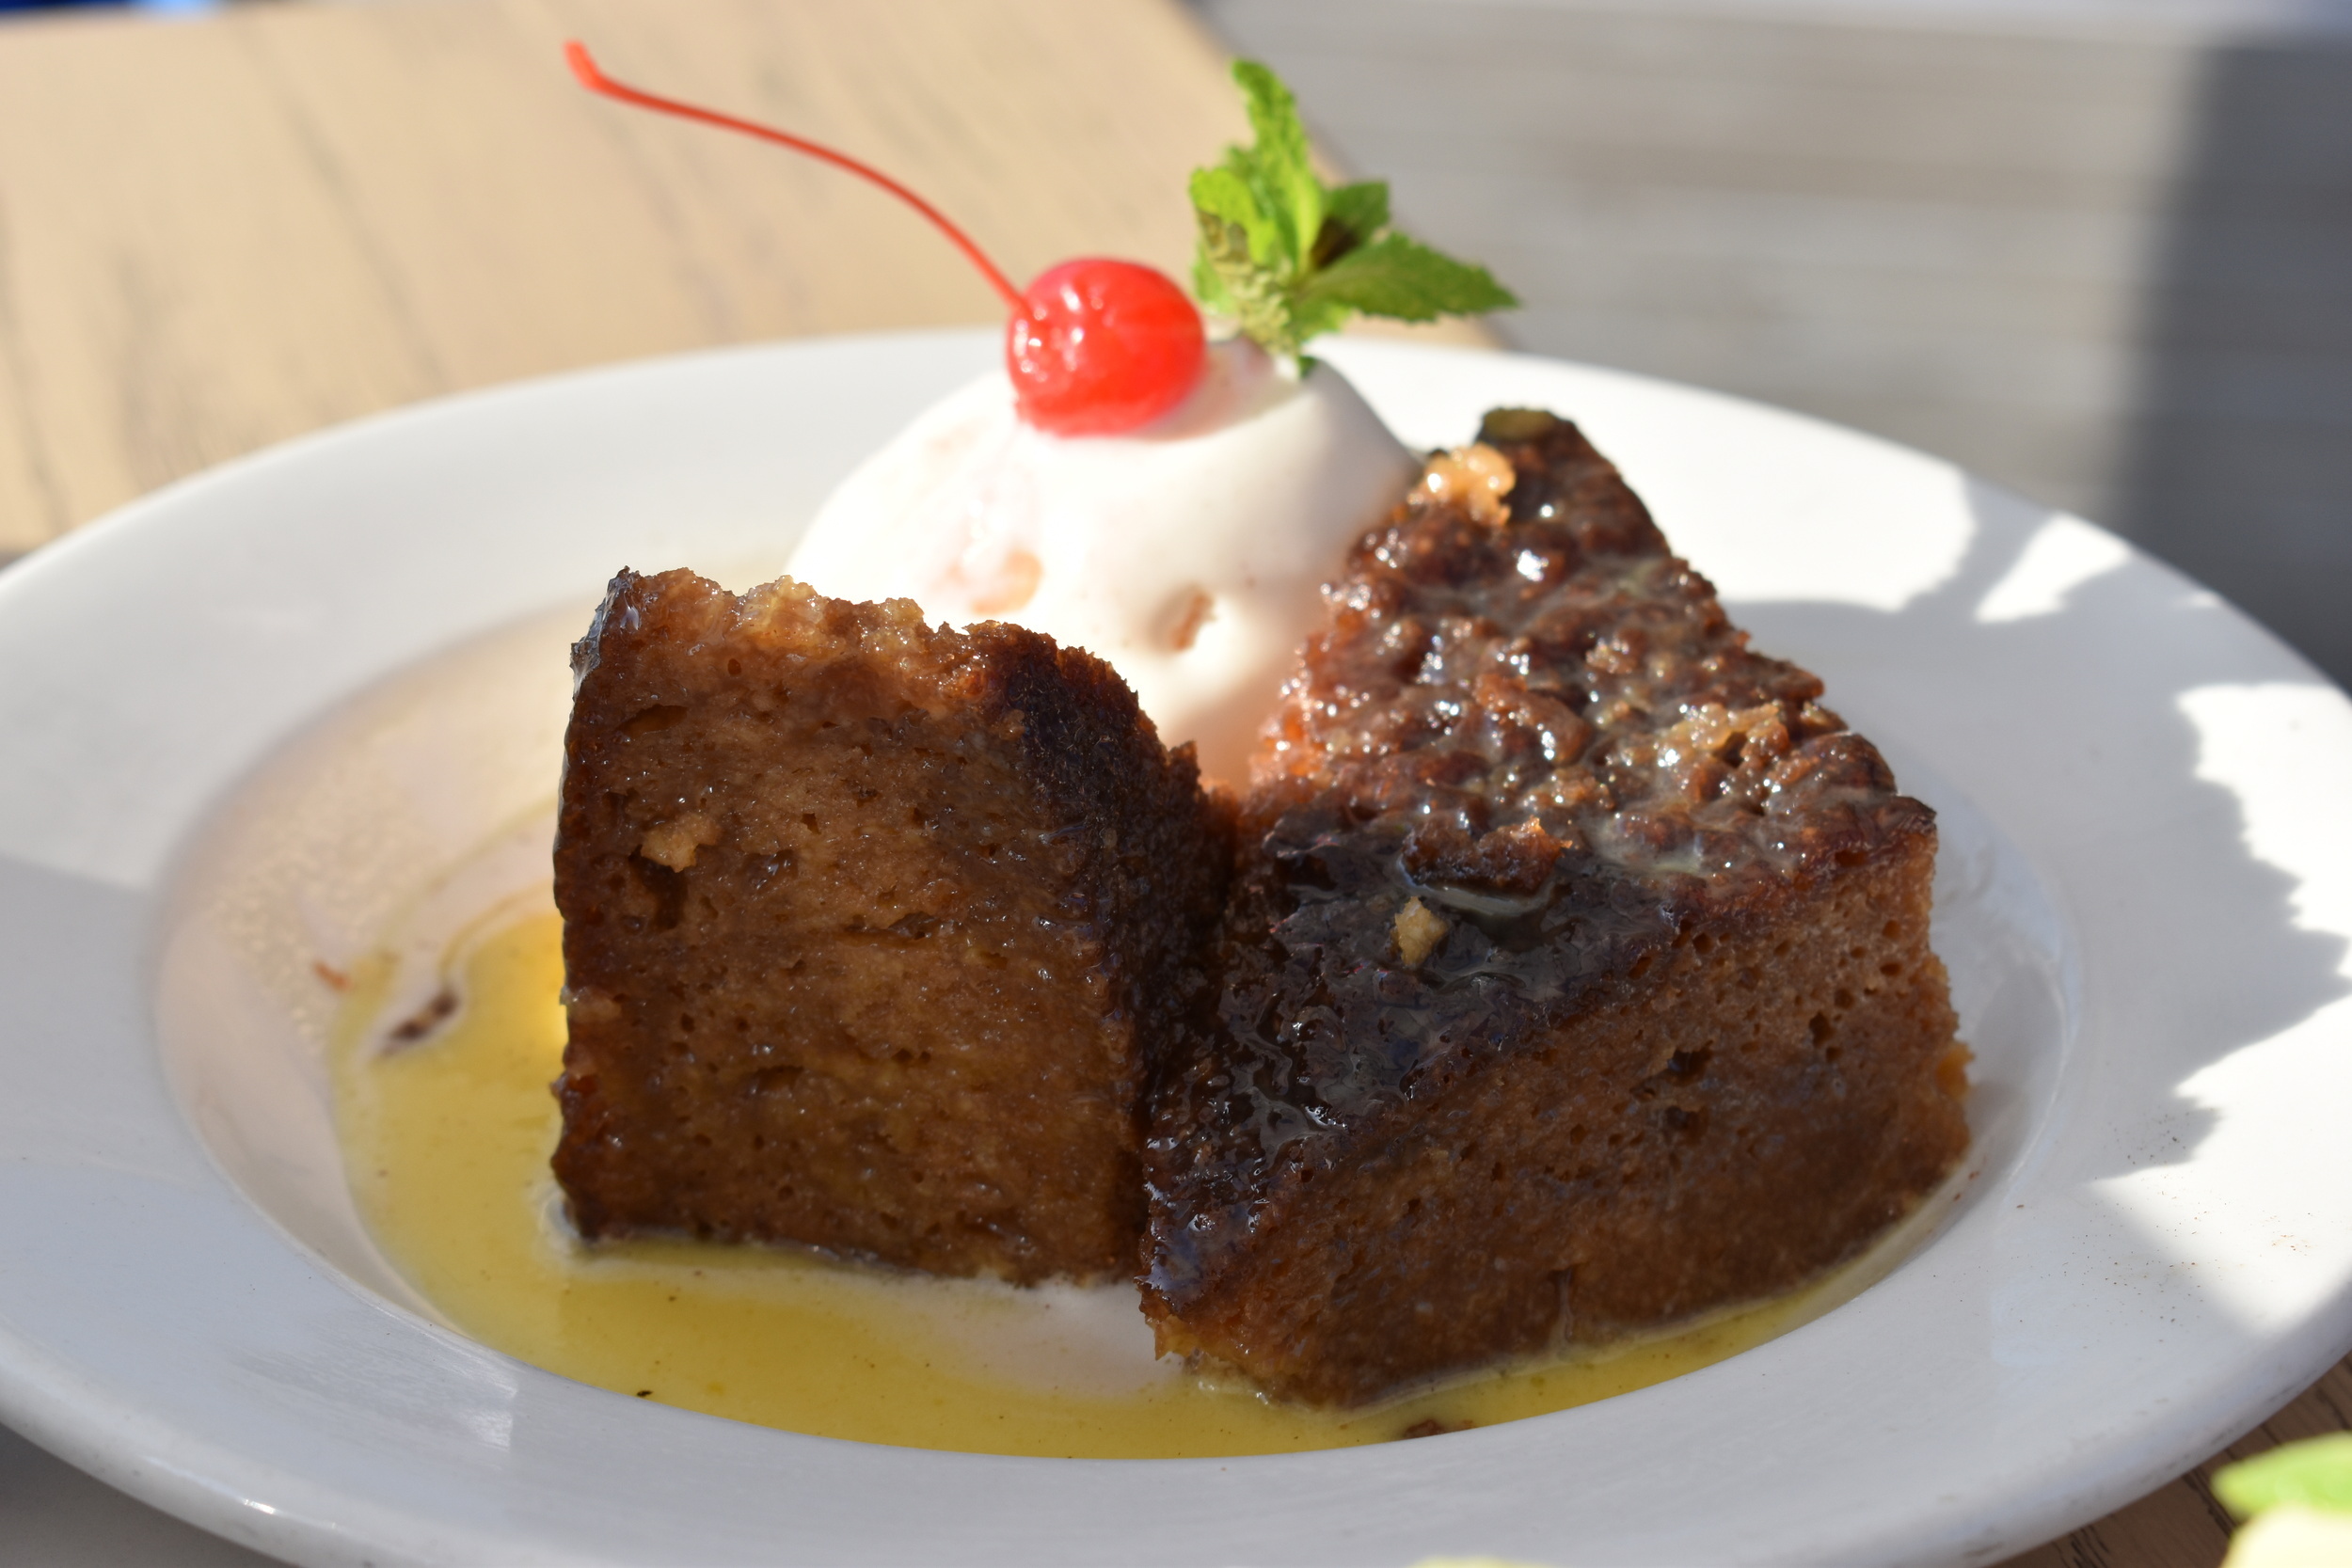 <p>One of the most popular South African desserts is malva pudding, but despite the name, don’t expect to find this pudding in any snack pack. Instead, malva pudding is a sort of sponge cake made with apricot and topped with custard or ice cream — which is closer to the British definition of pudding. <a href="https://www.food.com/recipe/malva-pudding-south-african-baked-dessert-118545"><span>Food.com has a super-moist version here</span></a>.</p><p><a href='https://www.msn.com/en-us/community/channel/vid-cj9pqbr0vn9in2b6ddcd8sfgpfq6x6utp44fssrv6mc2gtybw0us'>Follow us on MSN to see more of our exclusive lifestyle content.</a></p>